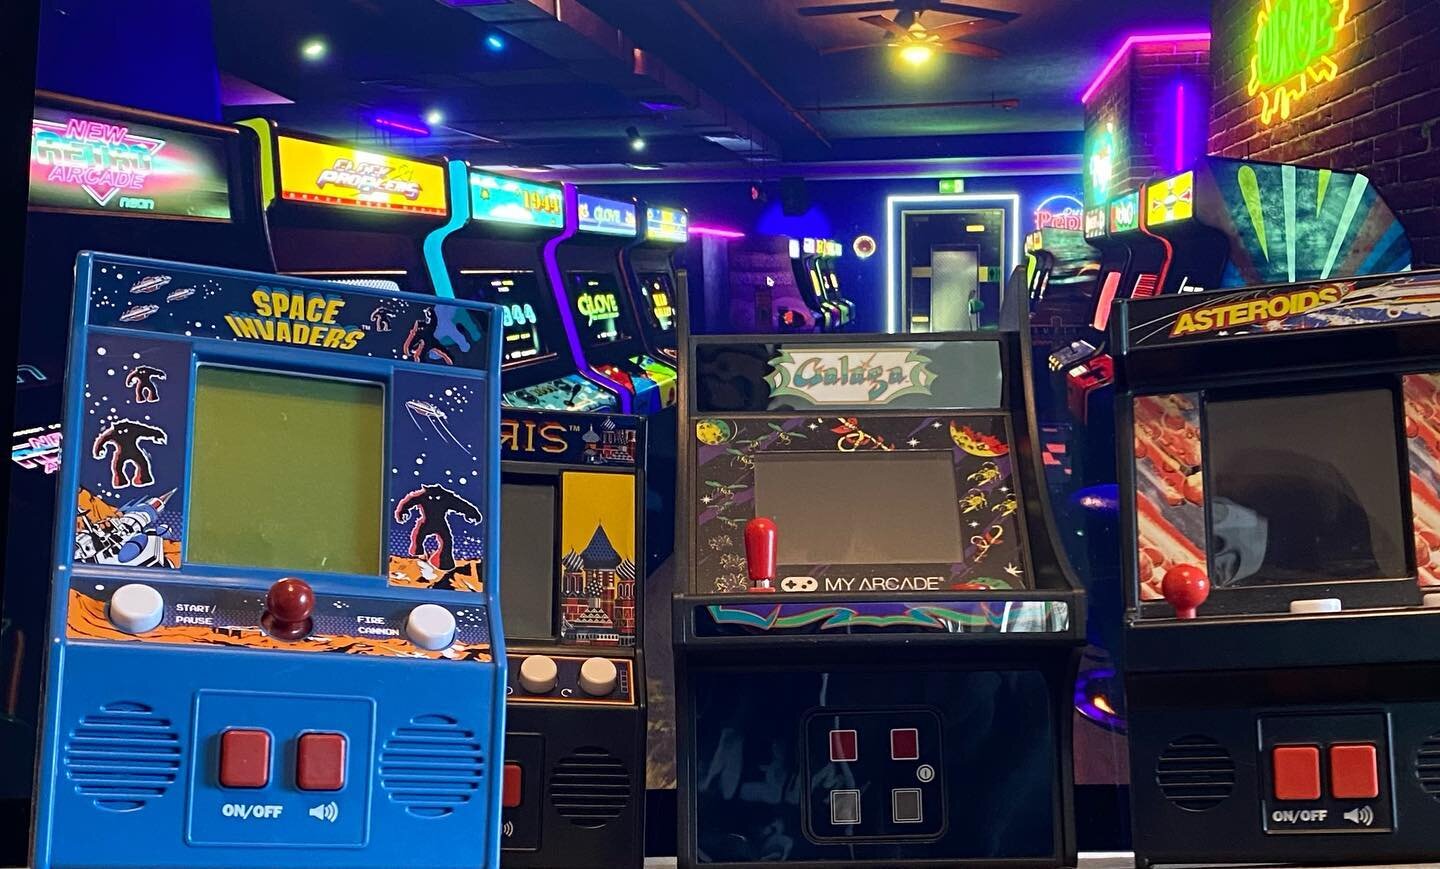 New to the archive a lot of four &ldquo;Basic Fun!&rdquo; Arcade Classics Mini Cabinets. Nothing that historical about these novel little handhelds but they do evoke a bit of nostalgia, and the LCD versions of the games are fun especially the Galaga,